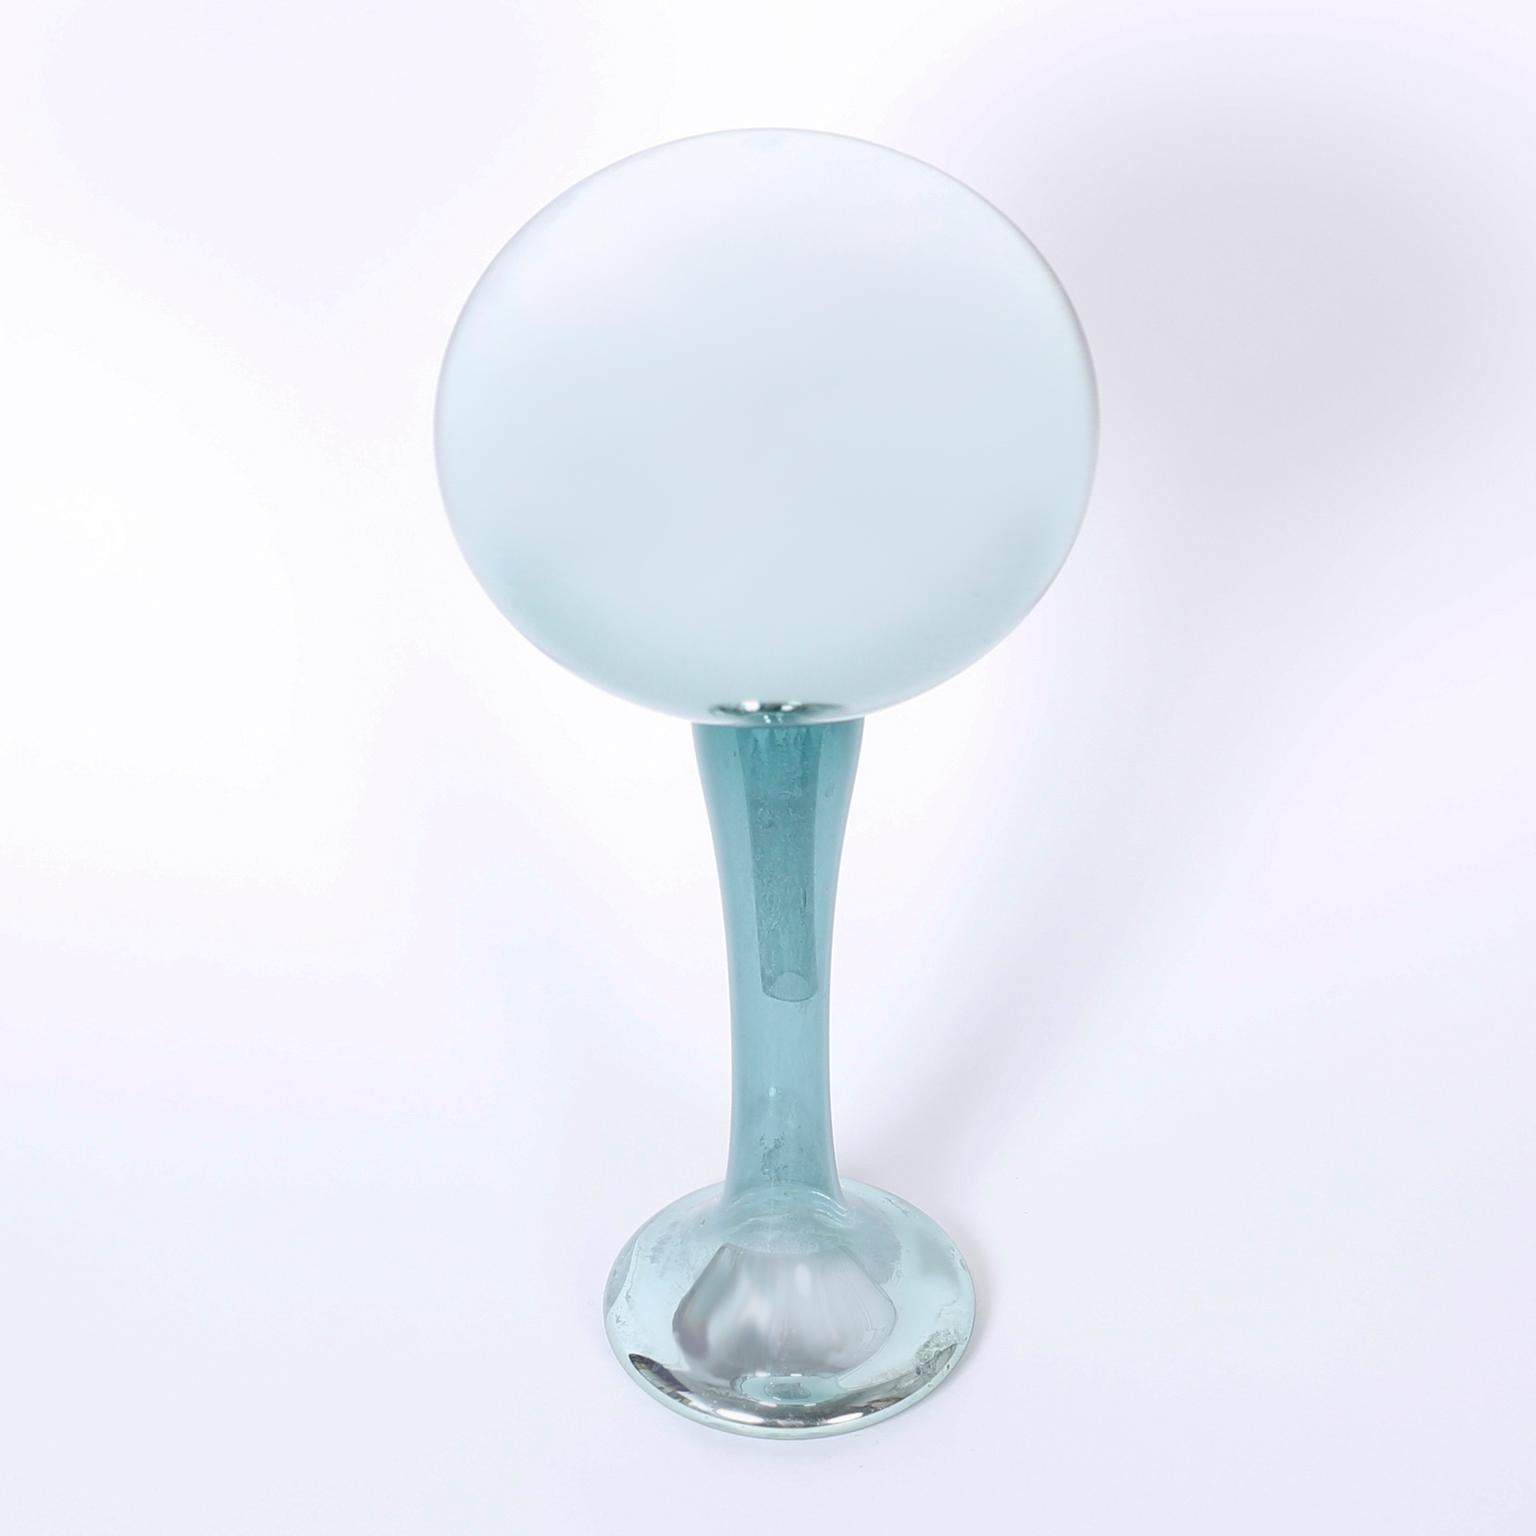 two-piece mercury glass gazing ball or sculpture with an alluring ice blue color and modern graceful form.